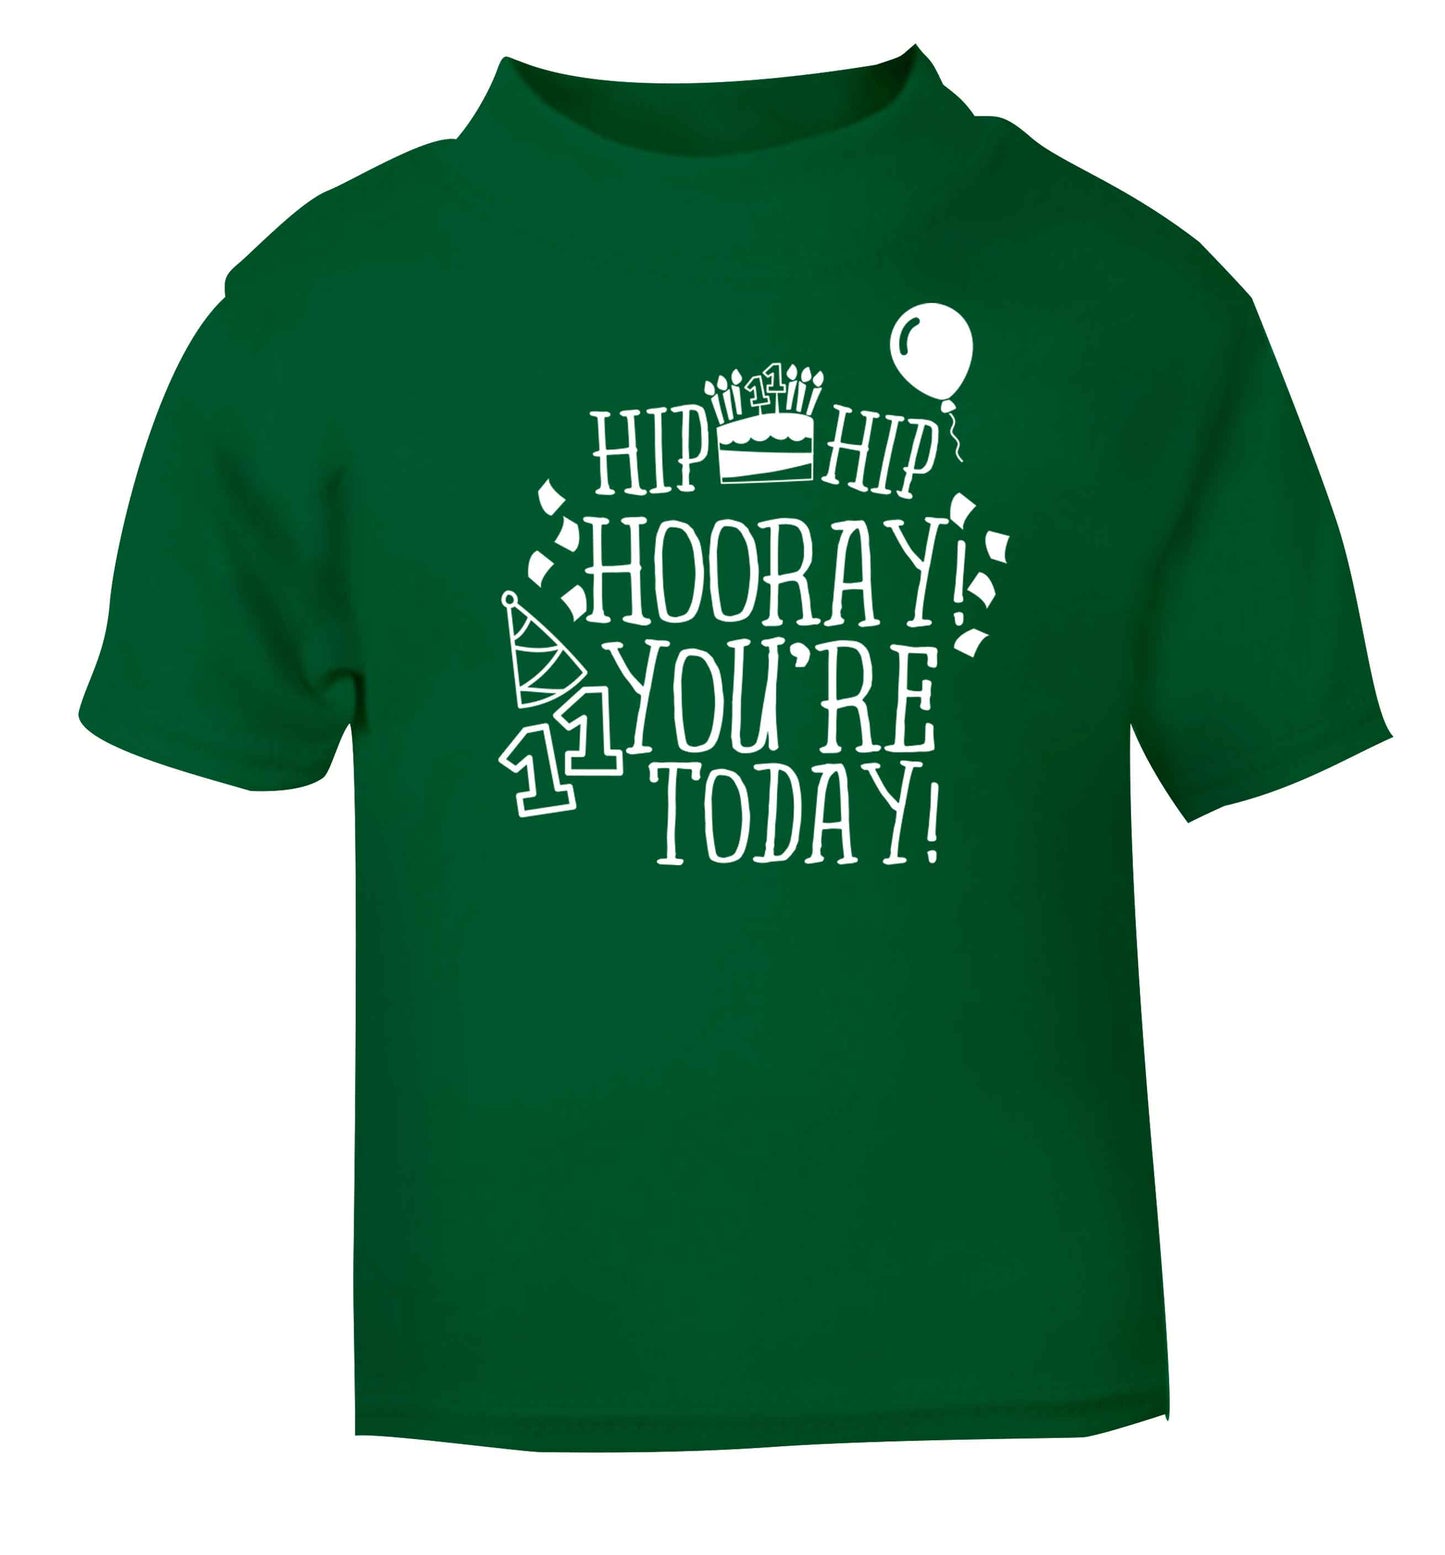 Hip hip hooray I you're eleven today! green baby toddler Tshirt 2 Years